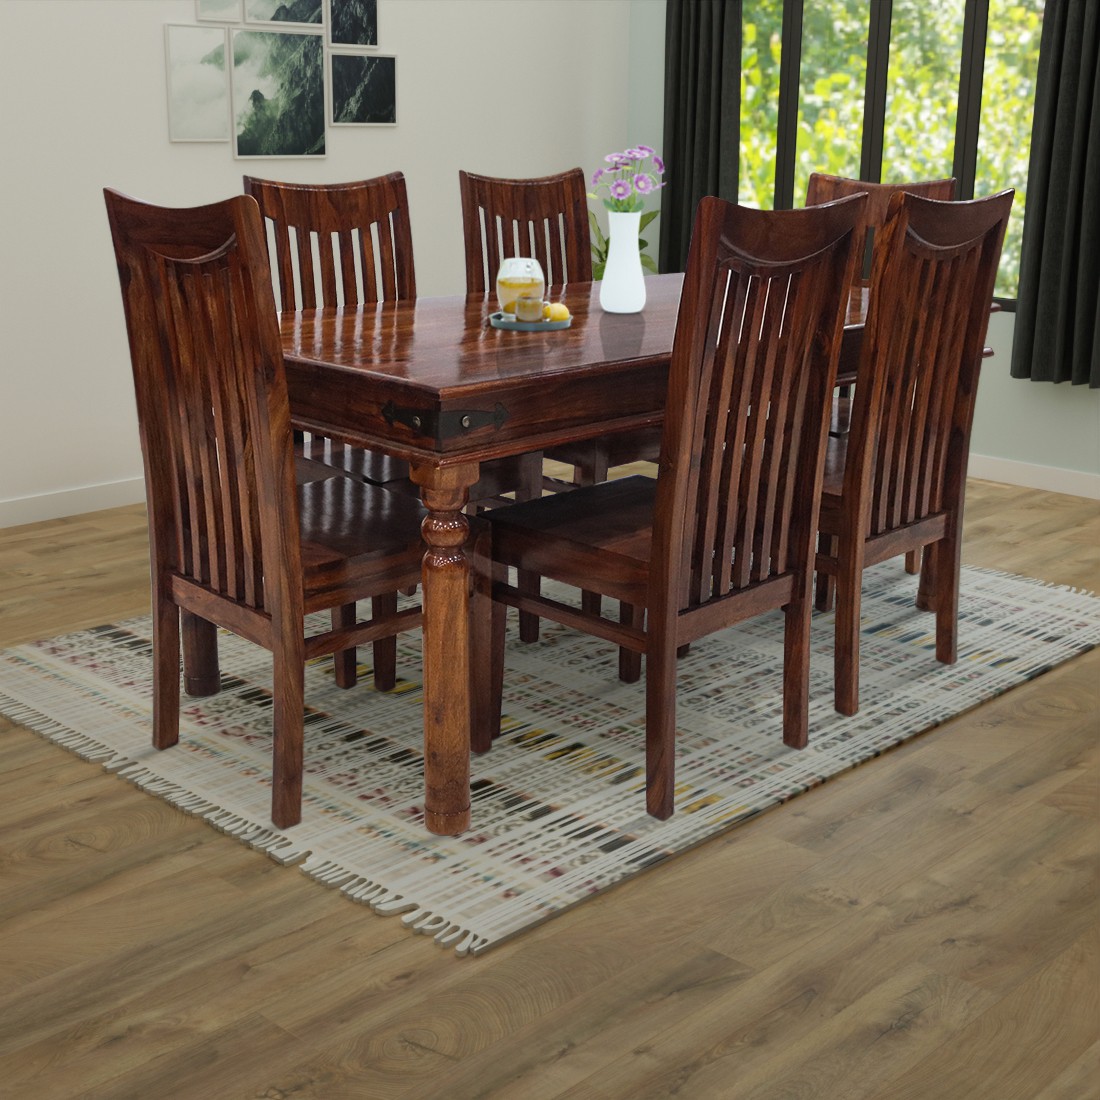 Aaram By Zebrs Sheesham Solid Wood 6 Seater Dining Set (Finish Color -Honey finish, Pre-assembled)